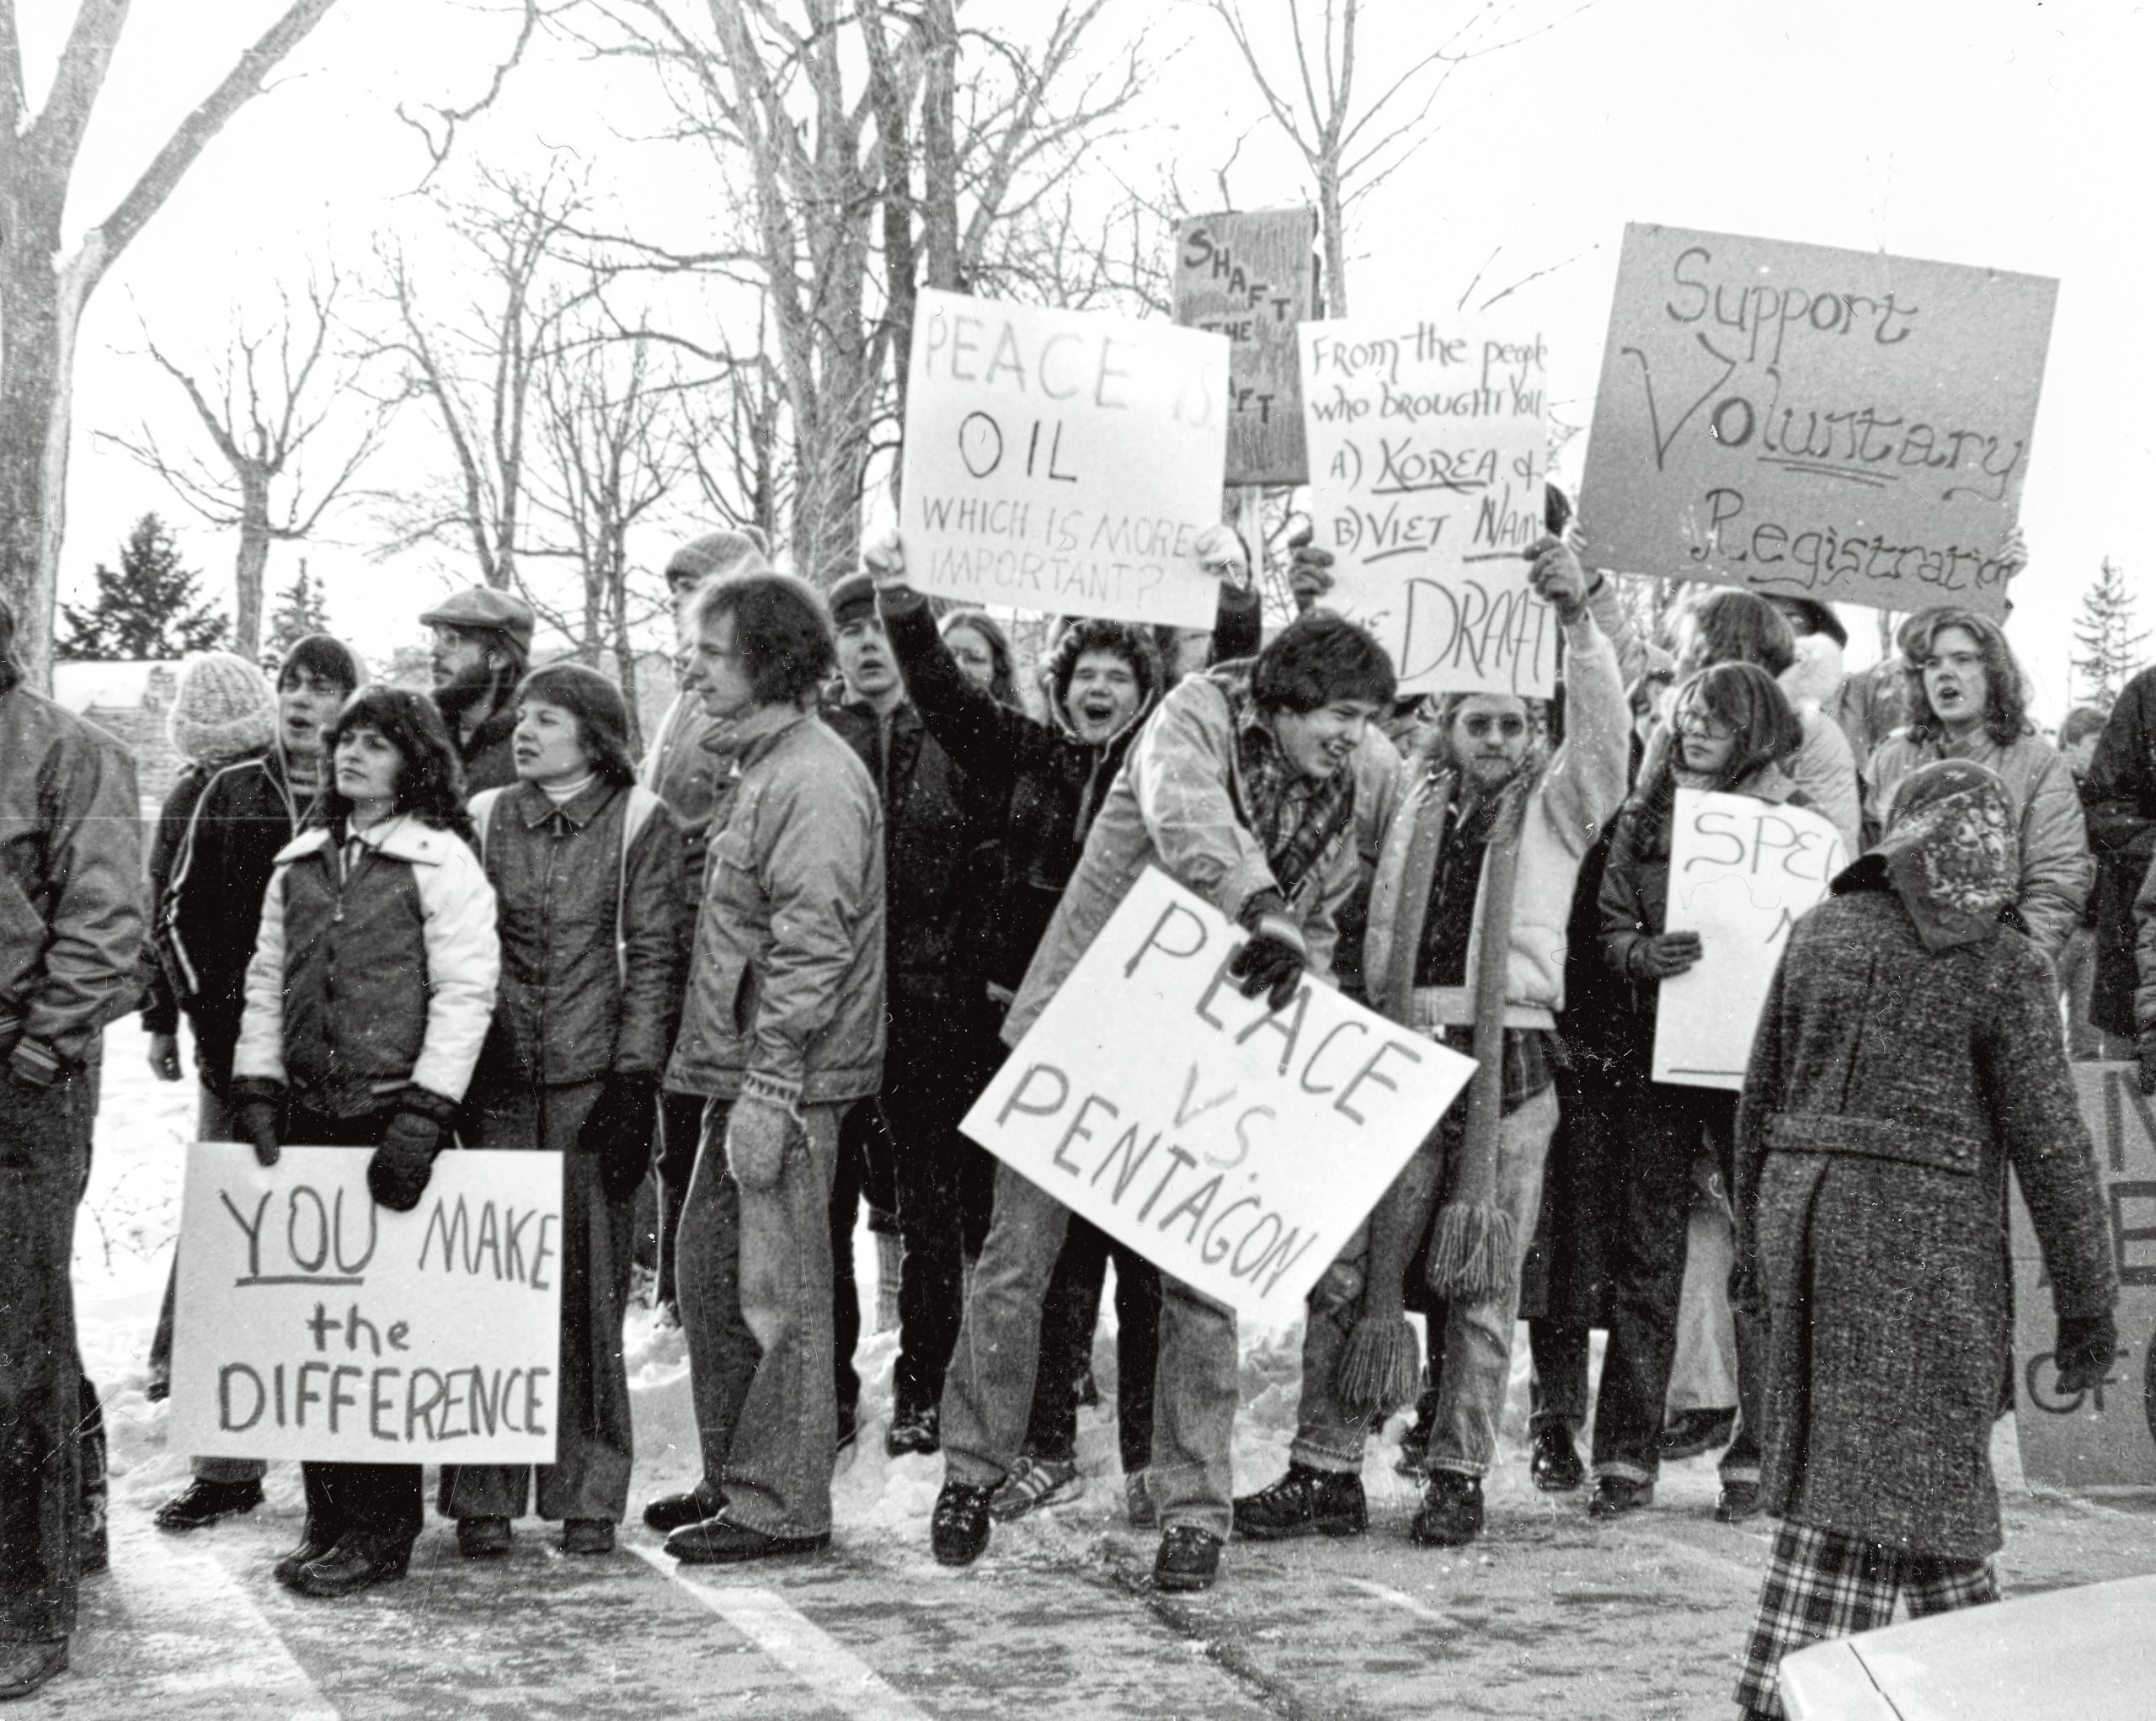 The Vietnam War spawned sit-ins and marches across college campuses in the late 1960s